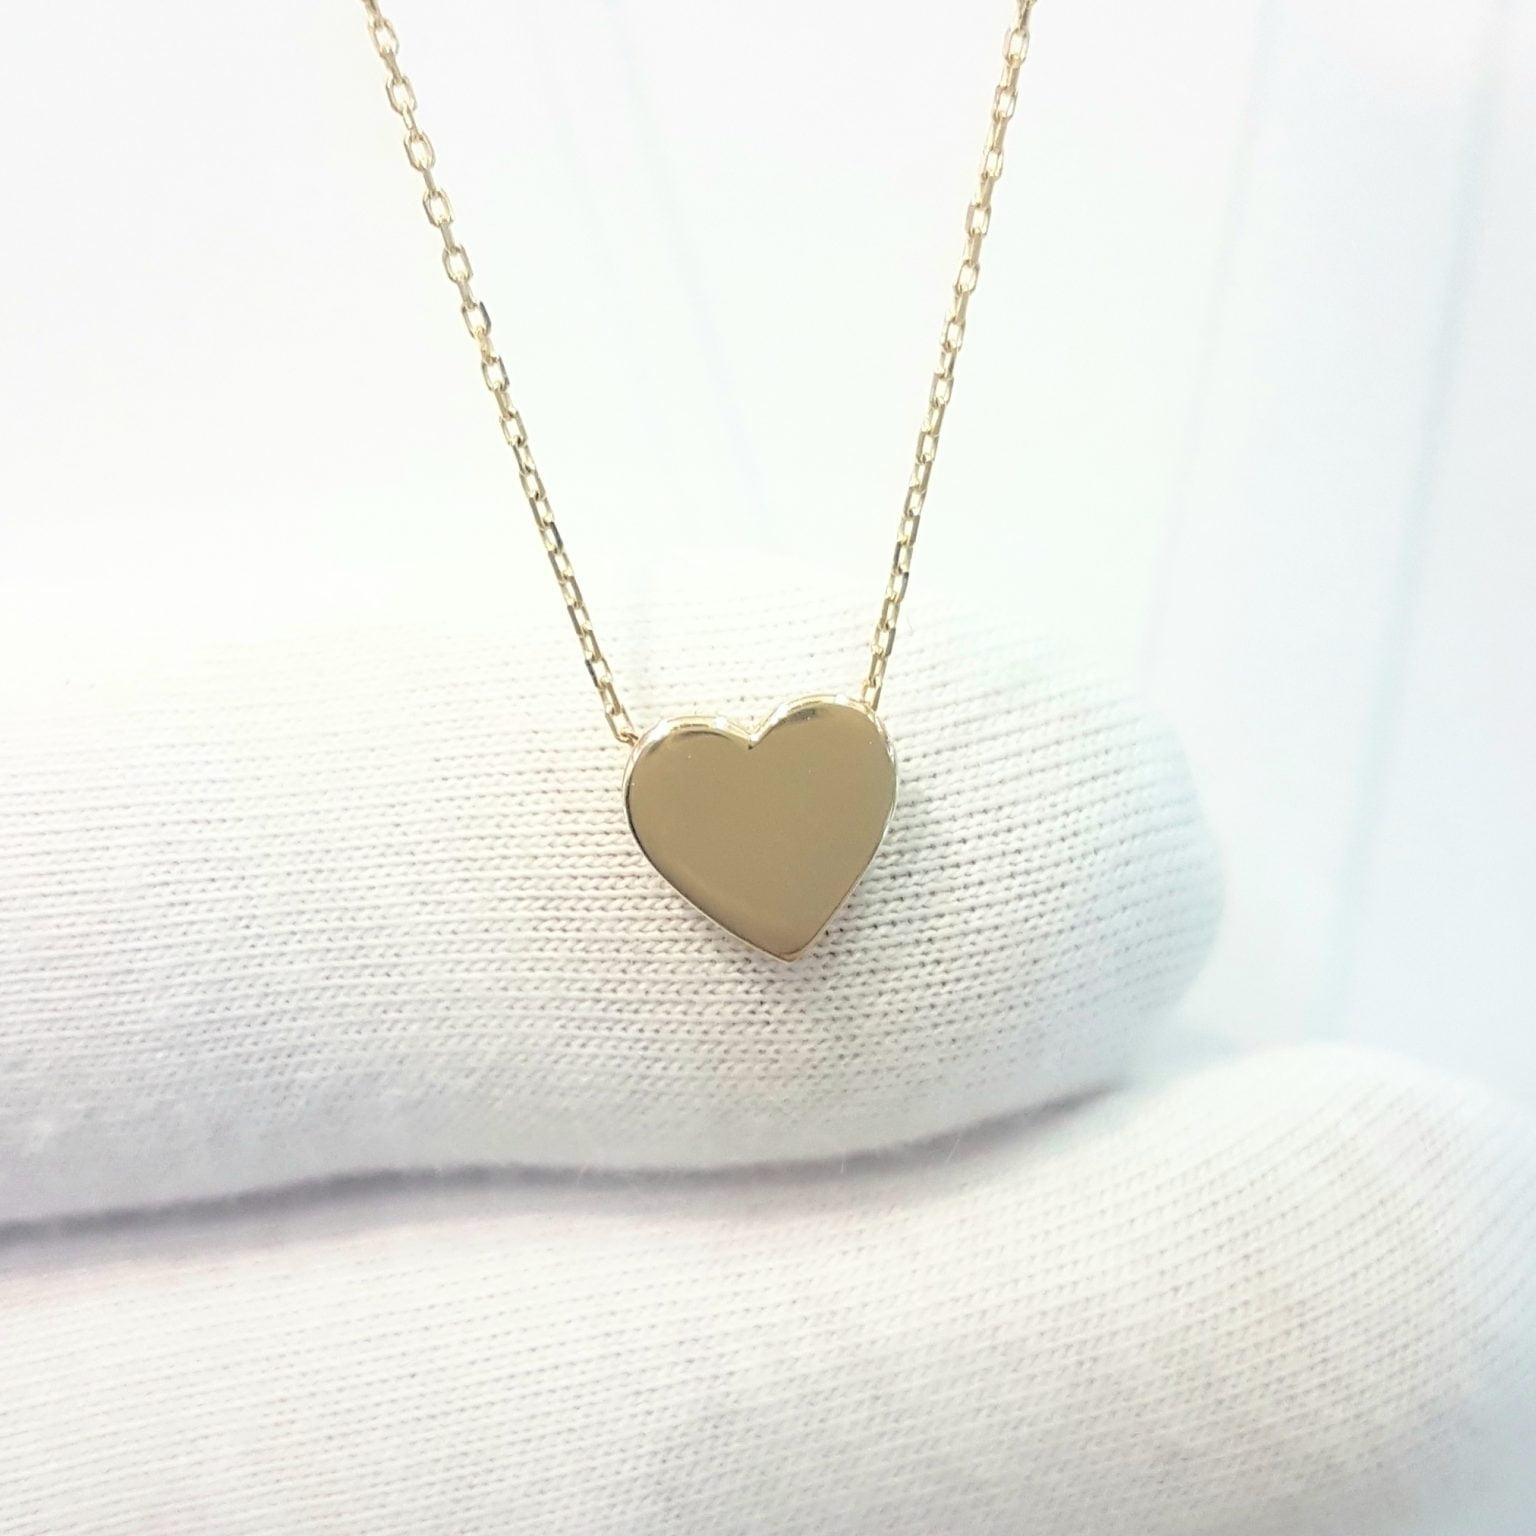 14k Real Solid Gold Dainty Tiny Heart Pendant Chain Necklace for Women